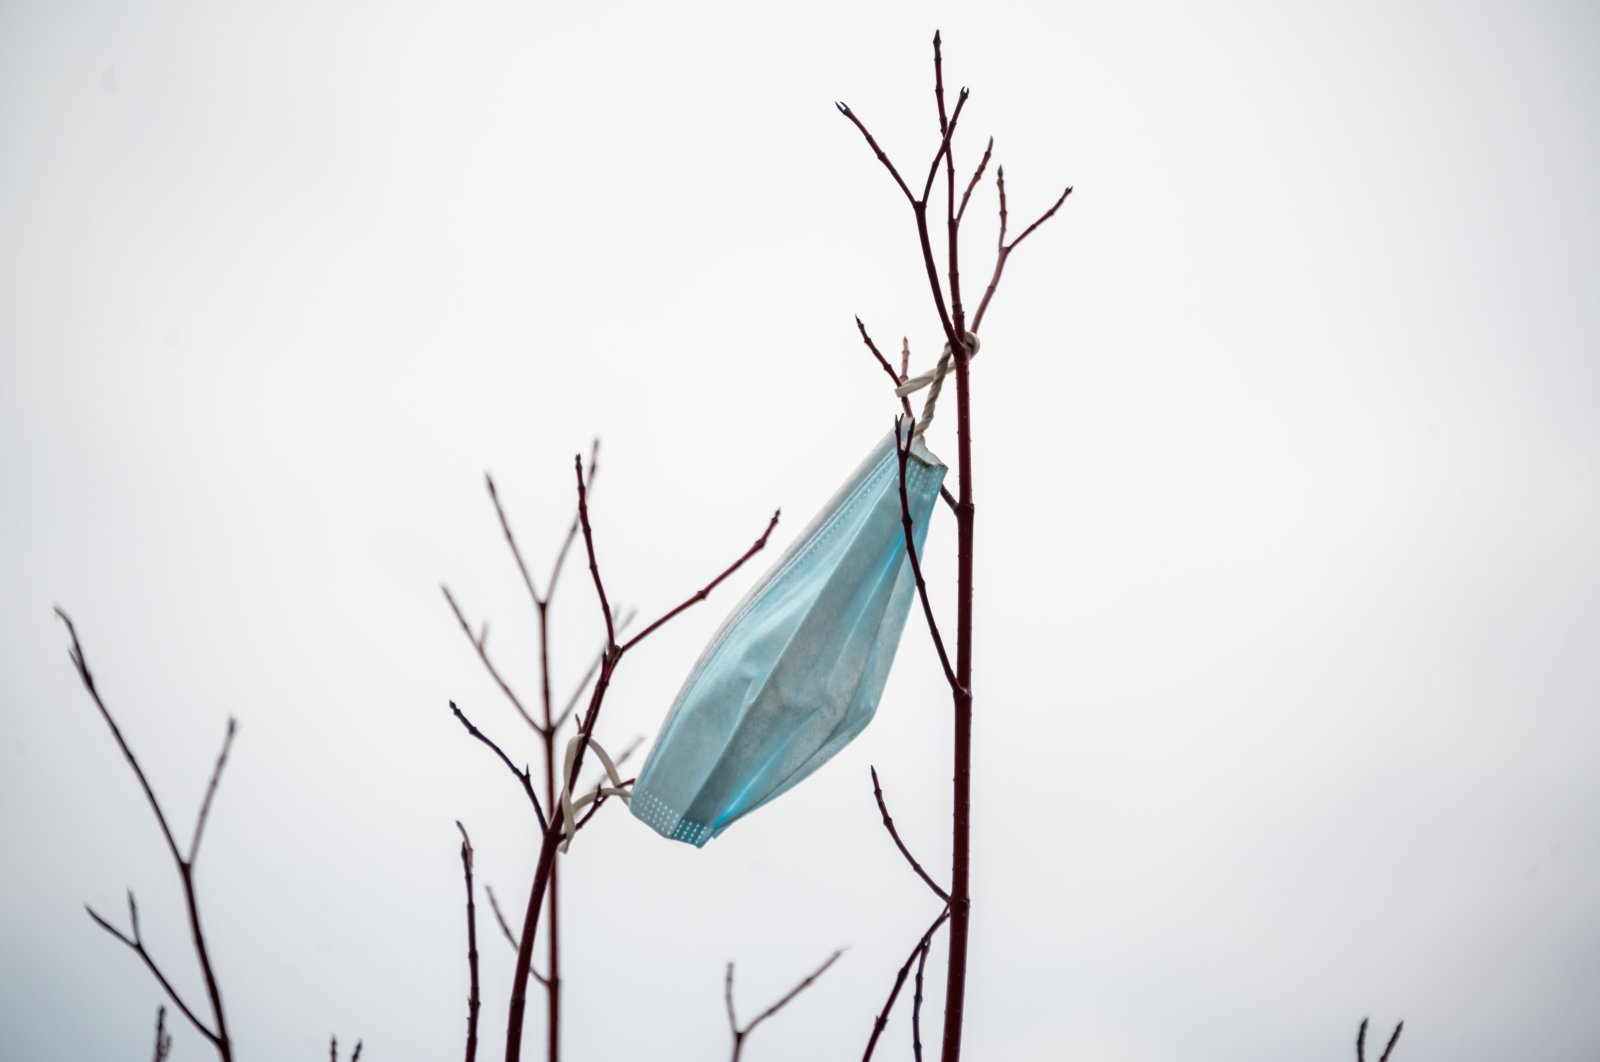 A discarded face mask is caught on a tree branch near Hudson Yards amid the coronavirus outbreak, New York City, New York, U.S., Dec. 31, 2020. (Photo by Getty Images)